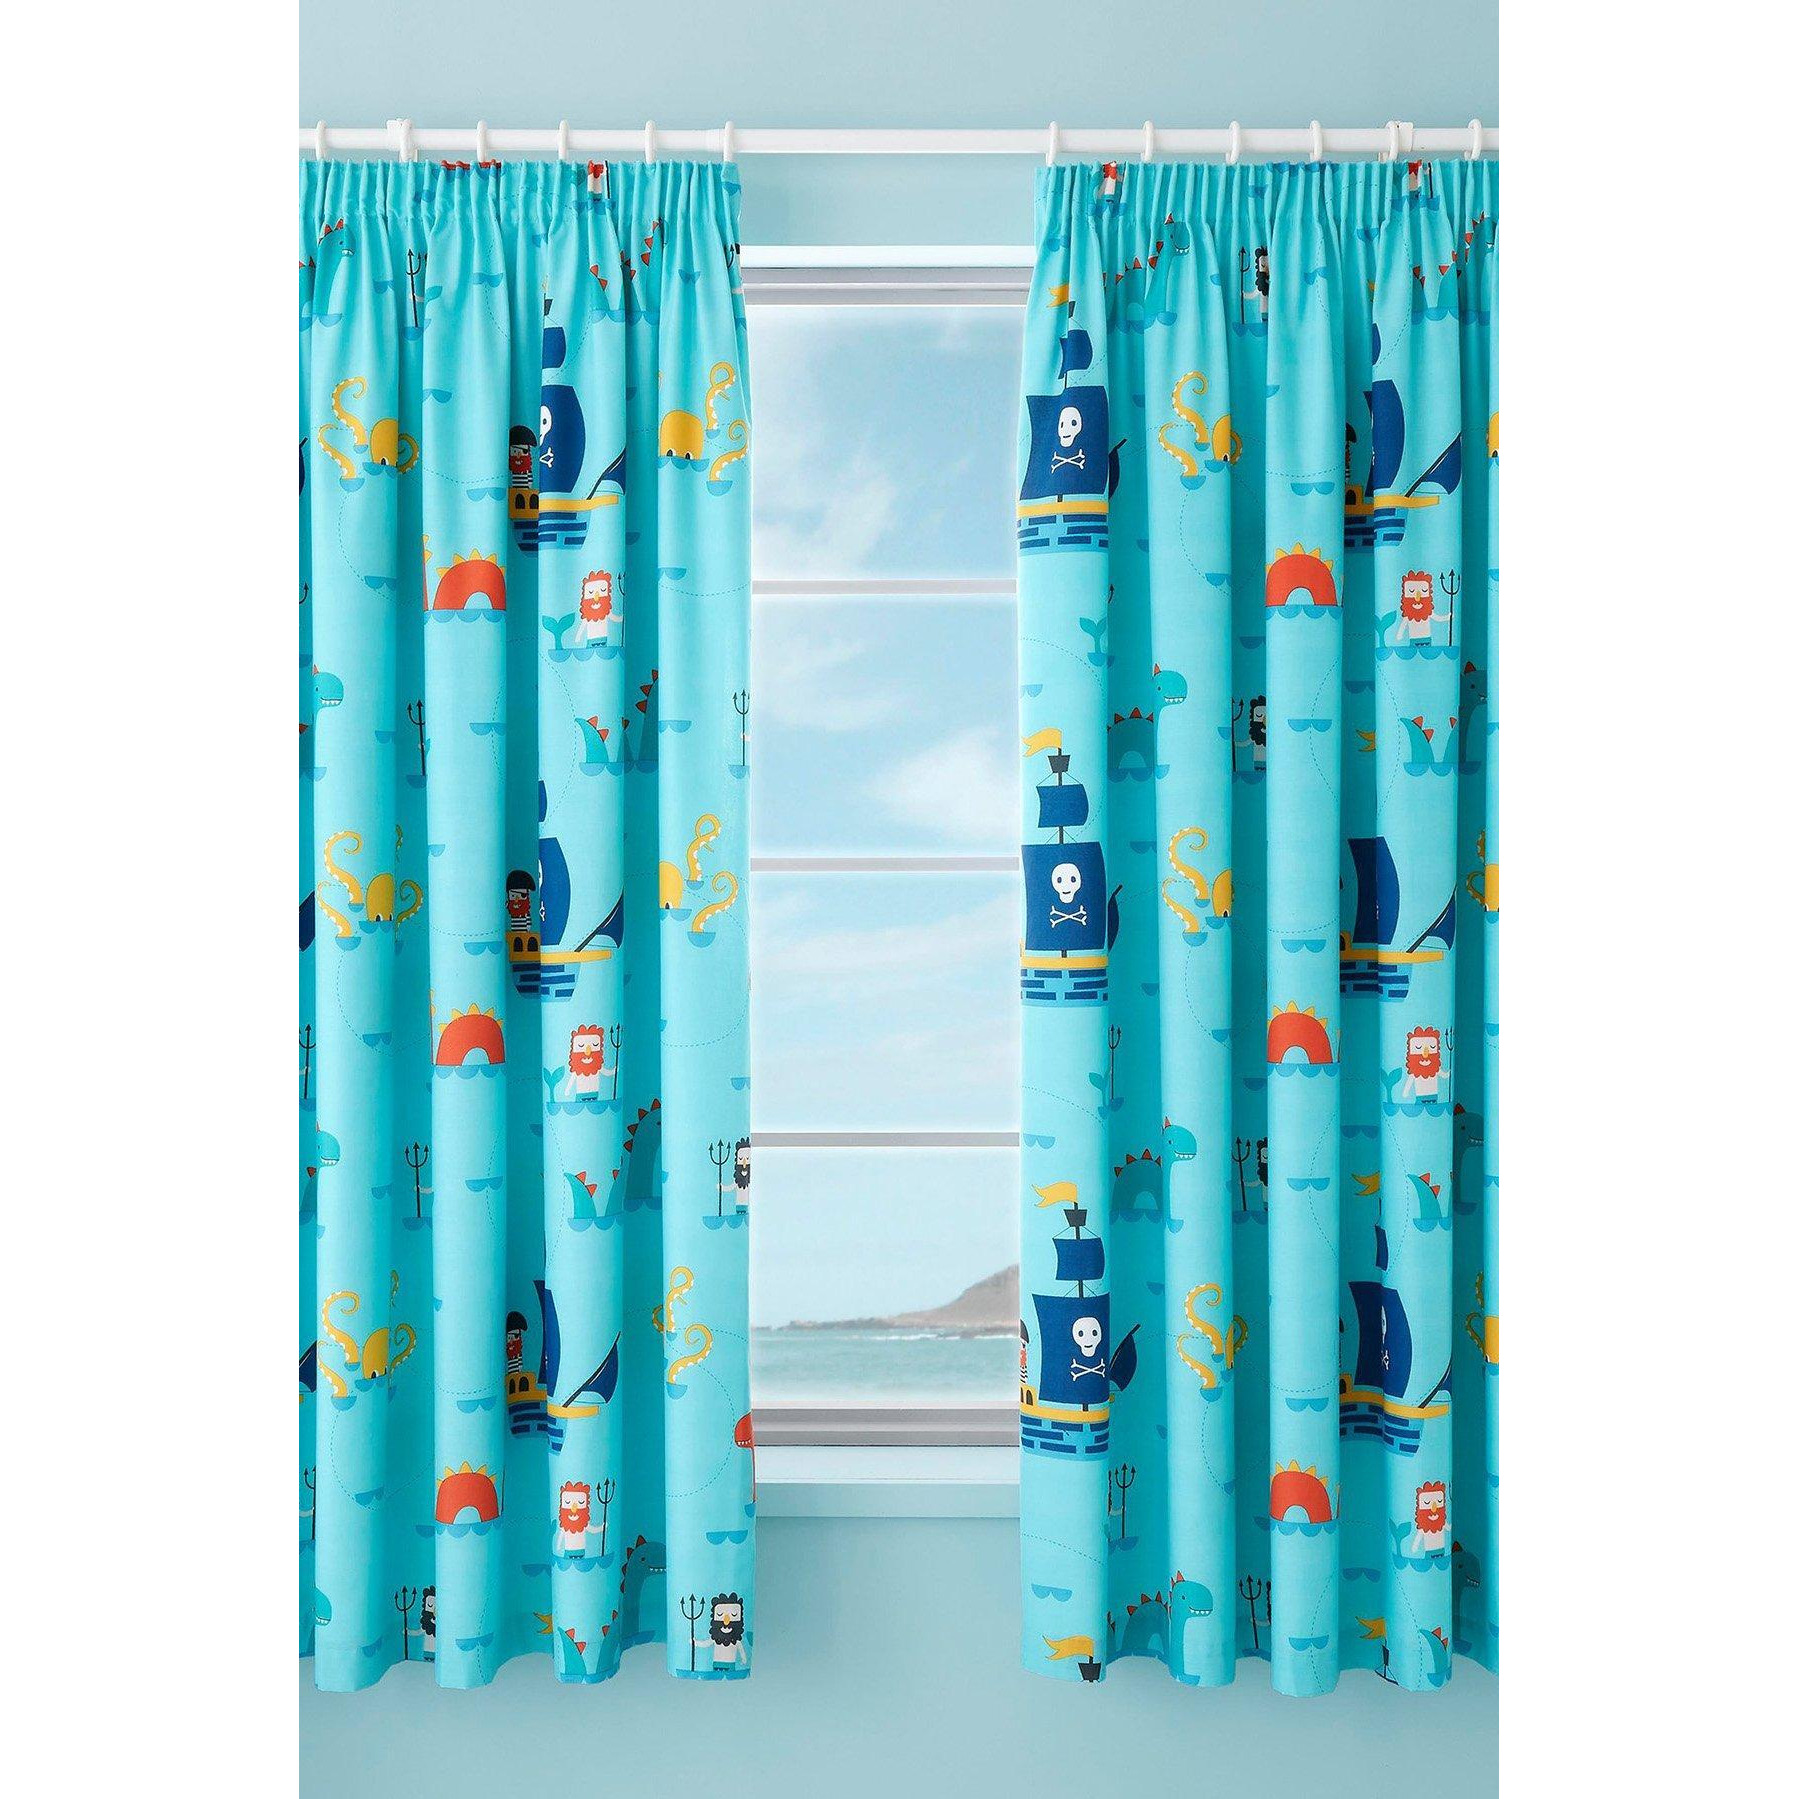 'Sea Monsters' Pair of Pencil Pleat Curtains - image 1